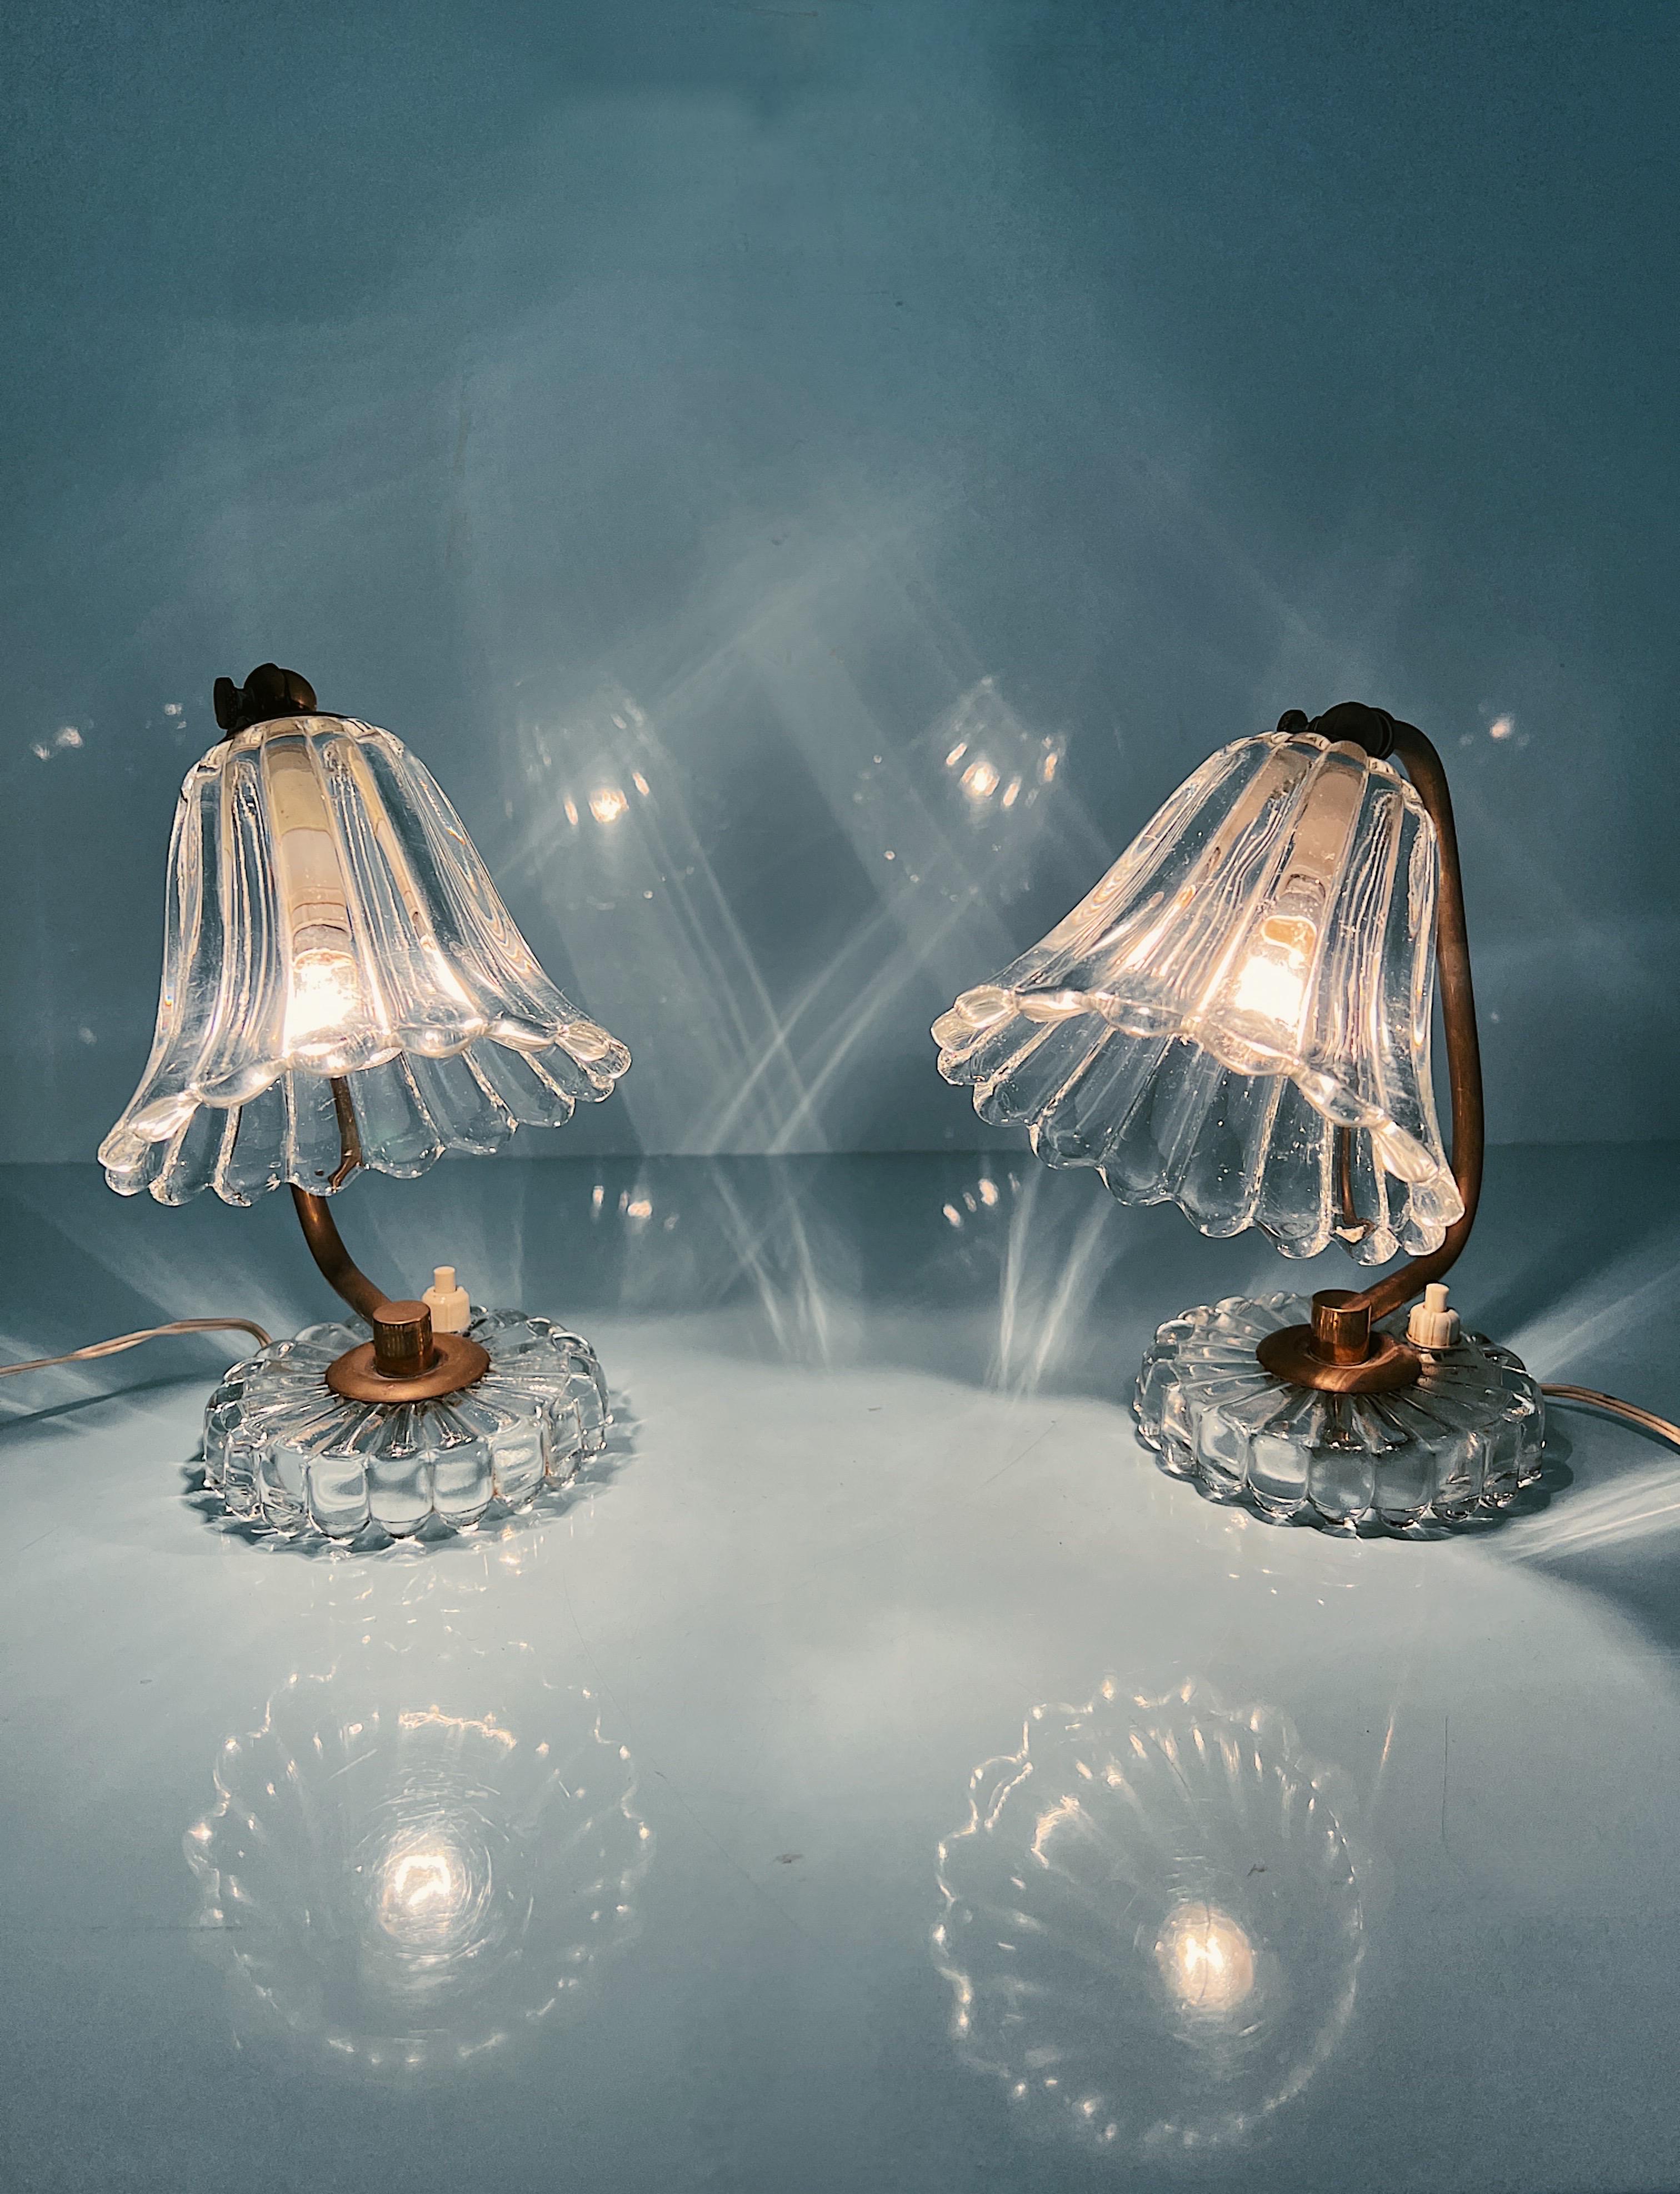 Sweet Pair of Vintage Barovier and Toso Table Lamps (Abat-Jour) from the 1940s.

Perfect for your bedside table. Crafted by Barovier and Toso, renowned artisans of their time, these lamps exude timeless elegance.

Featuring a convenient light switch